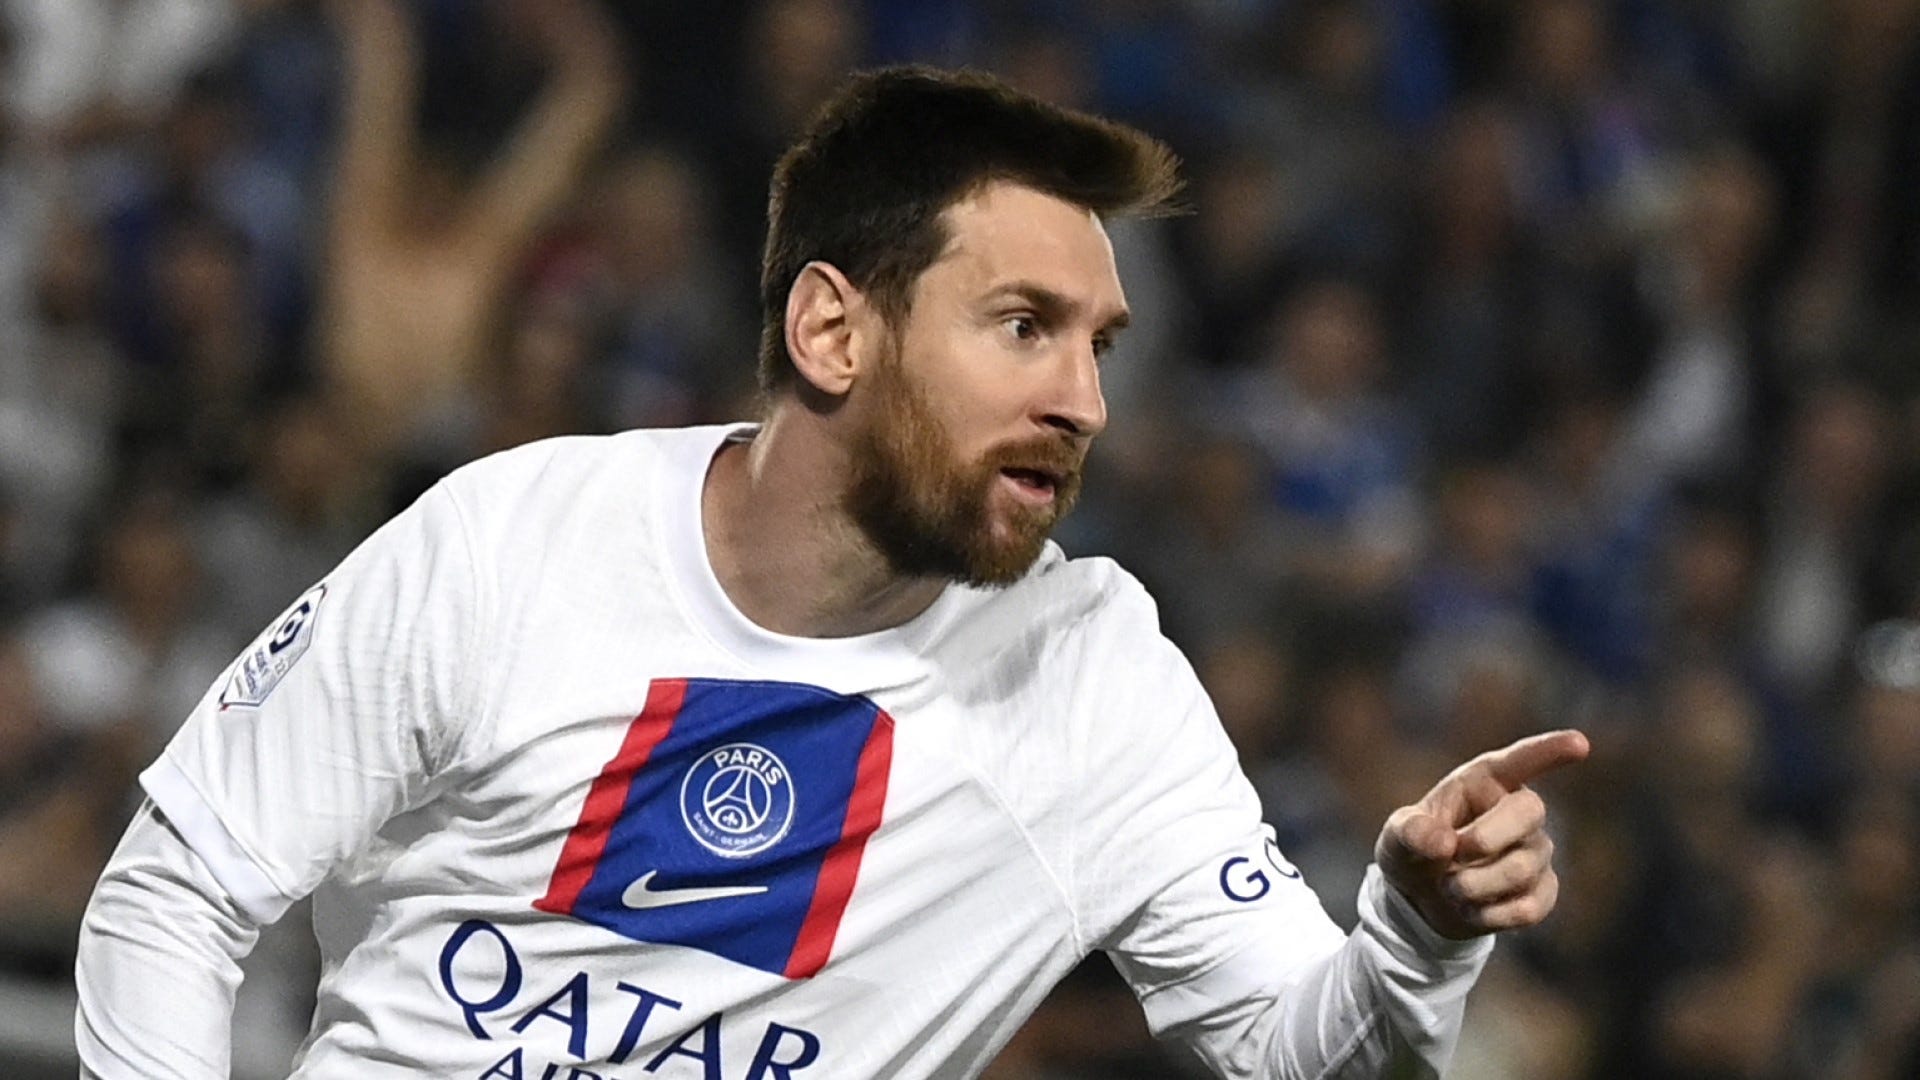 watch-lionel-messi-surpasses-cristiano-ronaldo-with-496th-goal-in-european-football-or-goal-com-india